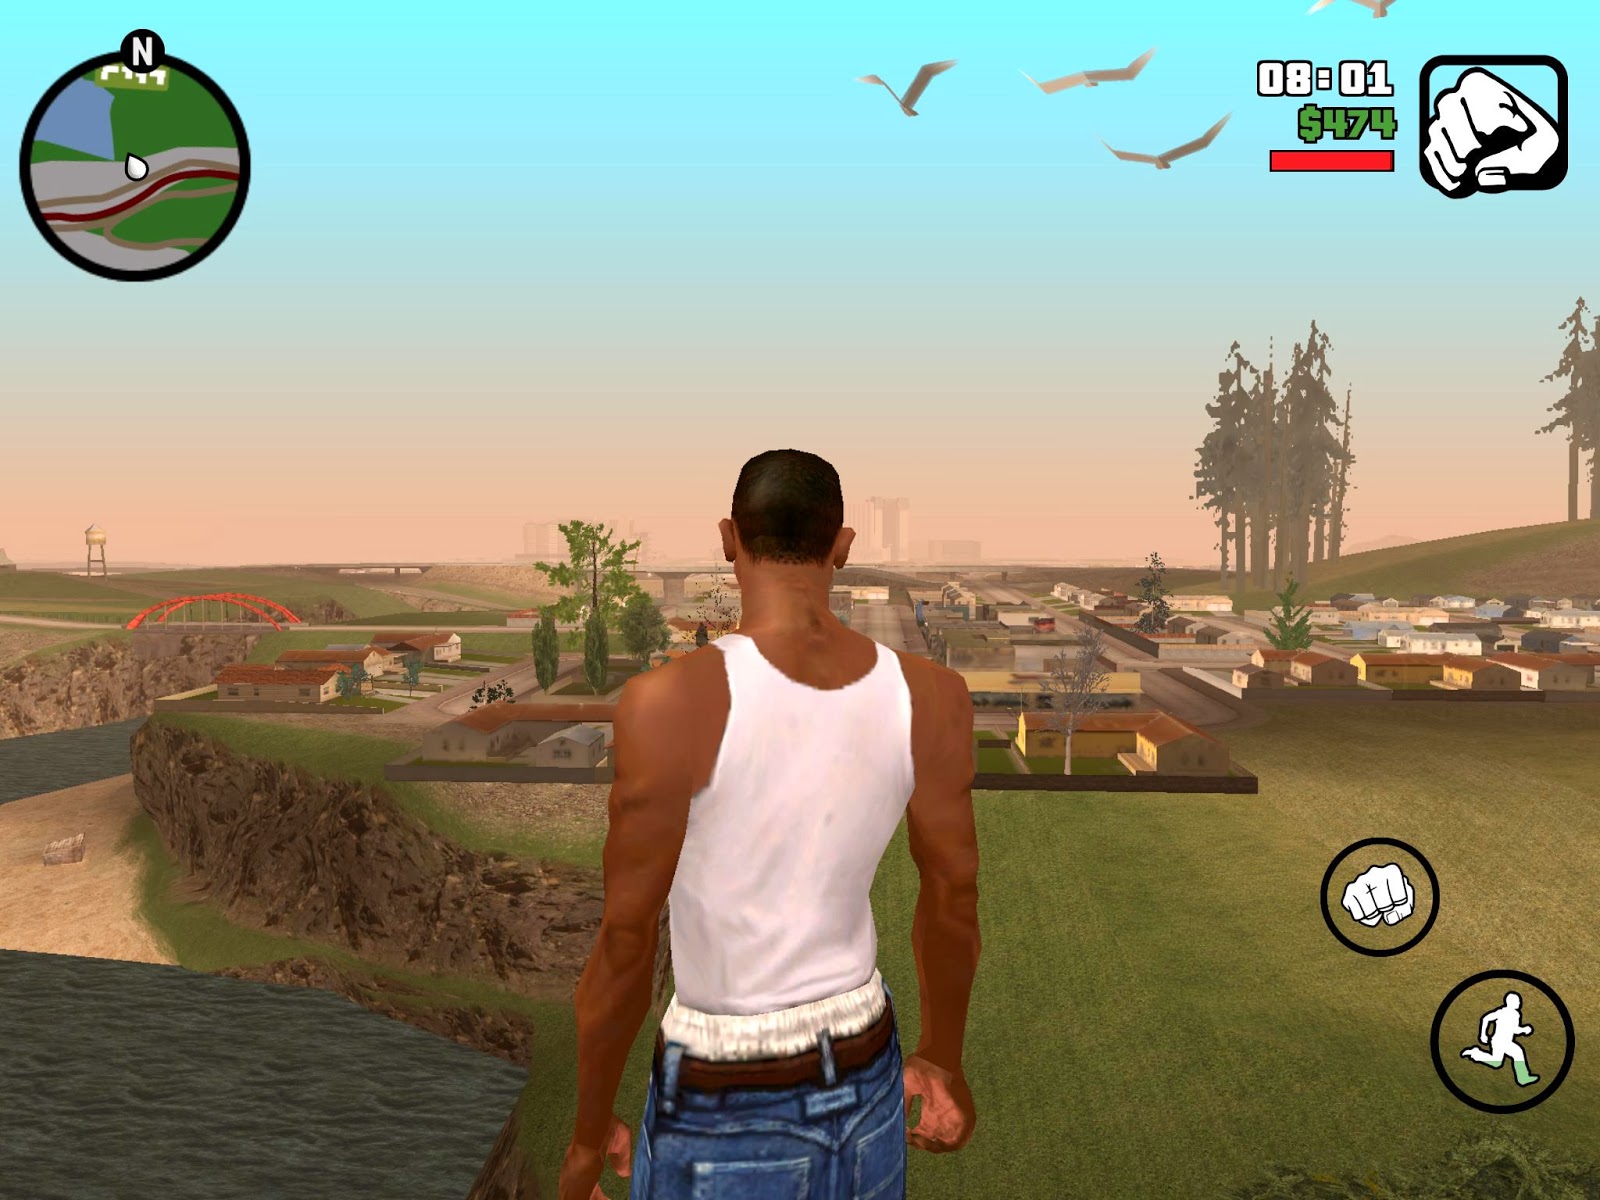 Gta san andreas cheats for android mobile free download for 3gb ram